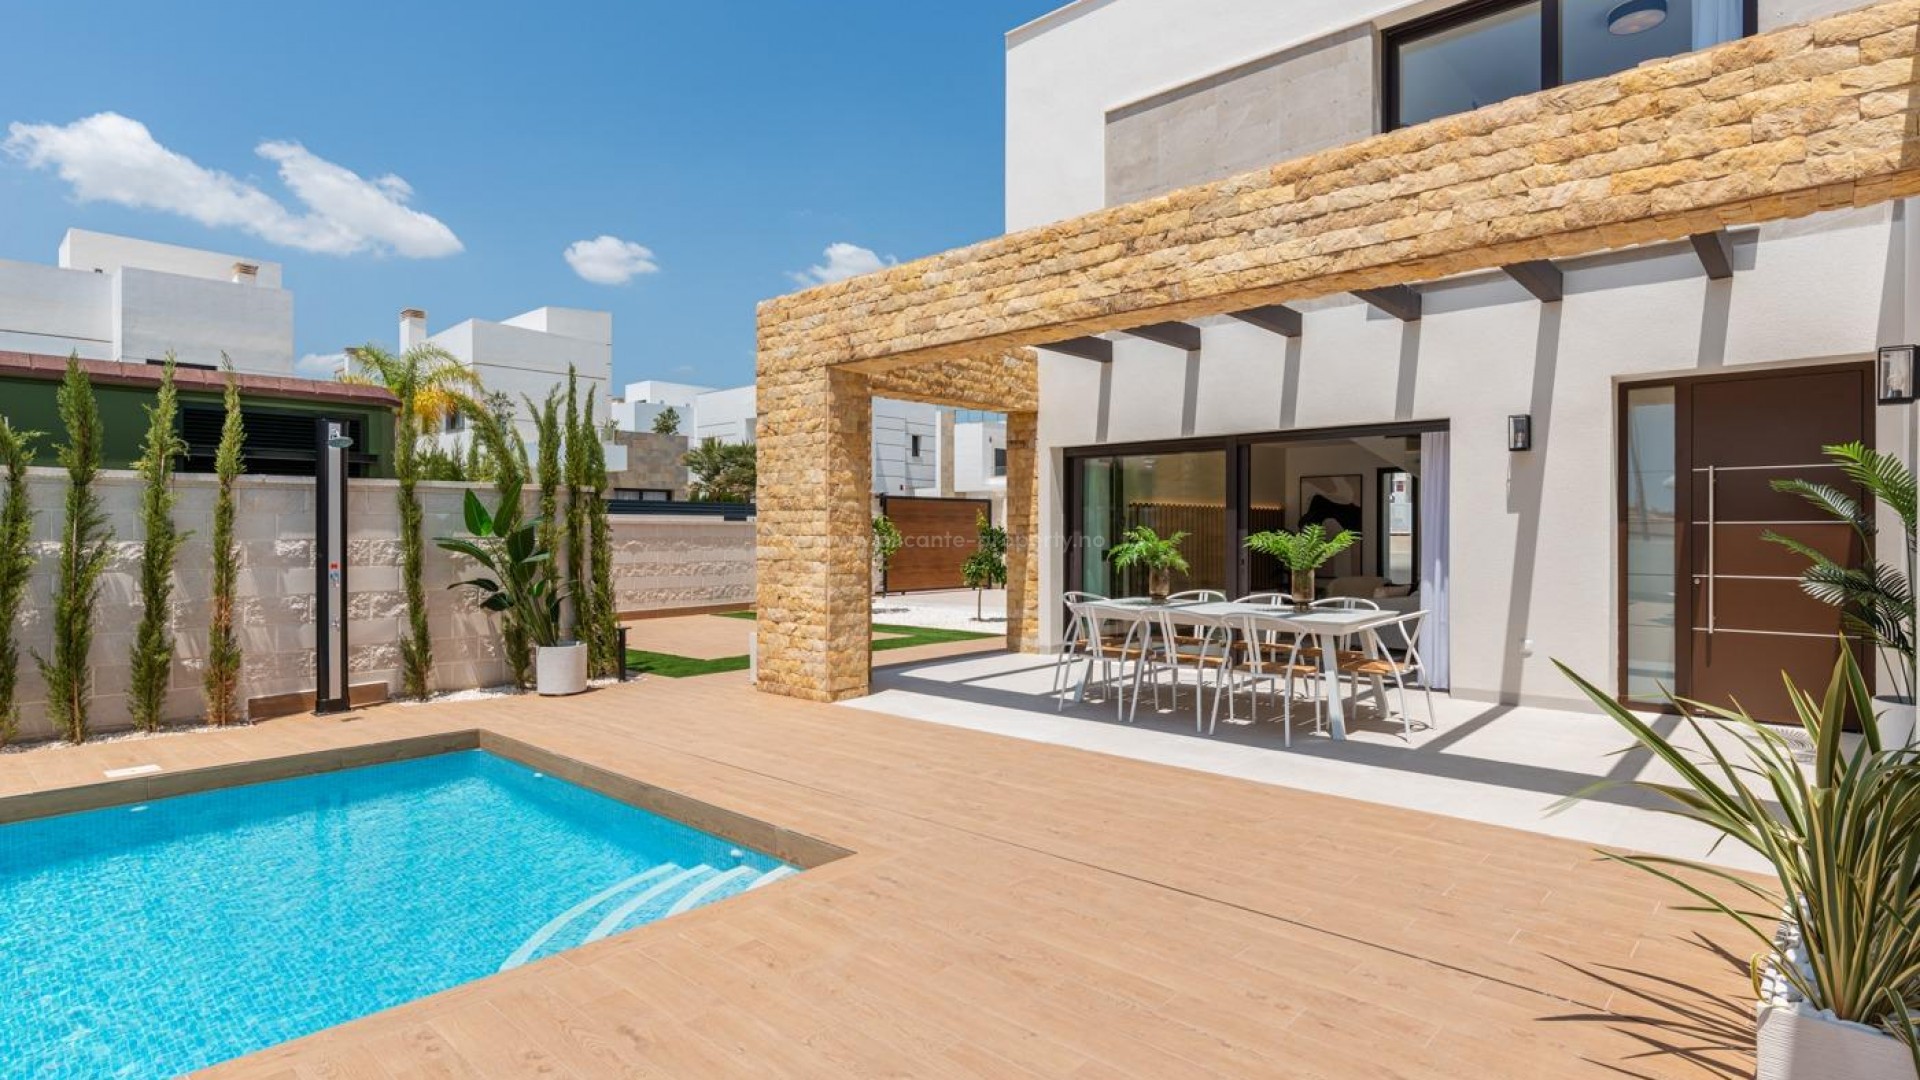 New luxury villa in modern style with private garden in Rojales, Ciudad Quesada, 3 bedrooms and 3 bathrooms, large terrace, private garden, swimming pool and parking